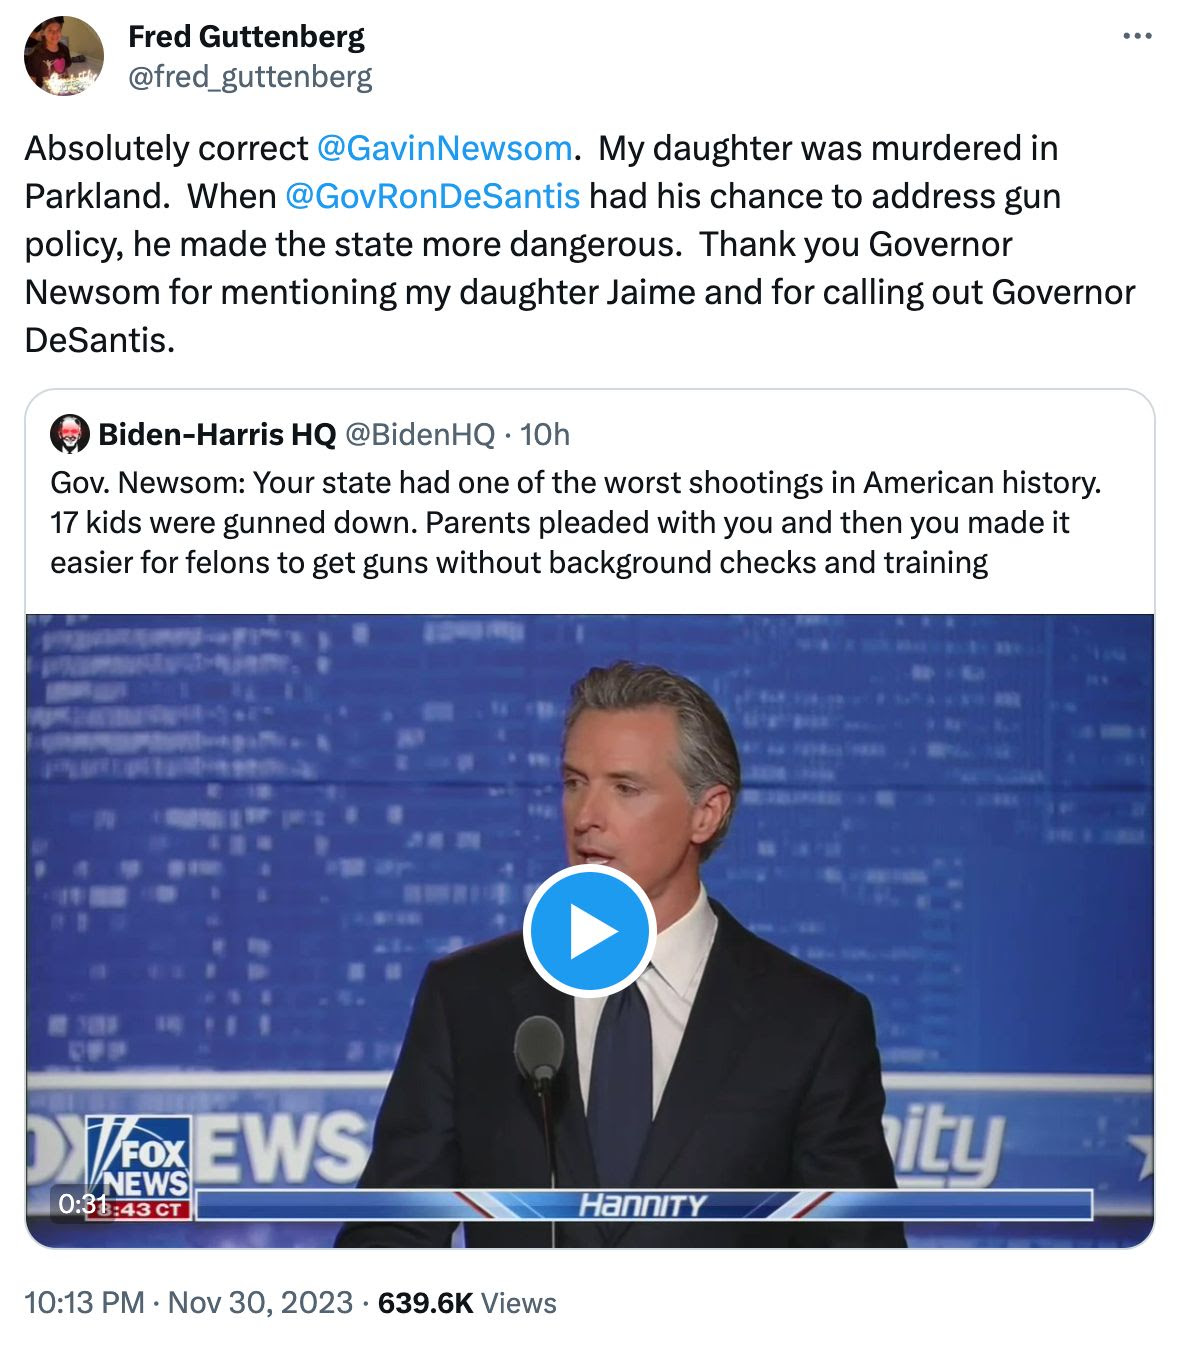 'Absolutely correct @GavinNewsom. My daughter was murdered in Parkland. When @GovRonDeSantis had his chance to address gun policy, he made the state more dangerous.  Thank you Governor Newsom for mentioning my daughter Jaime and for calling out Governor DeSantis.'